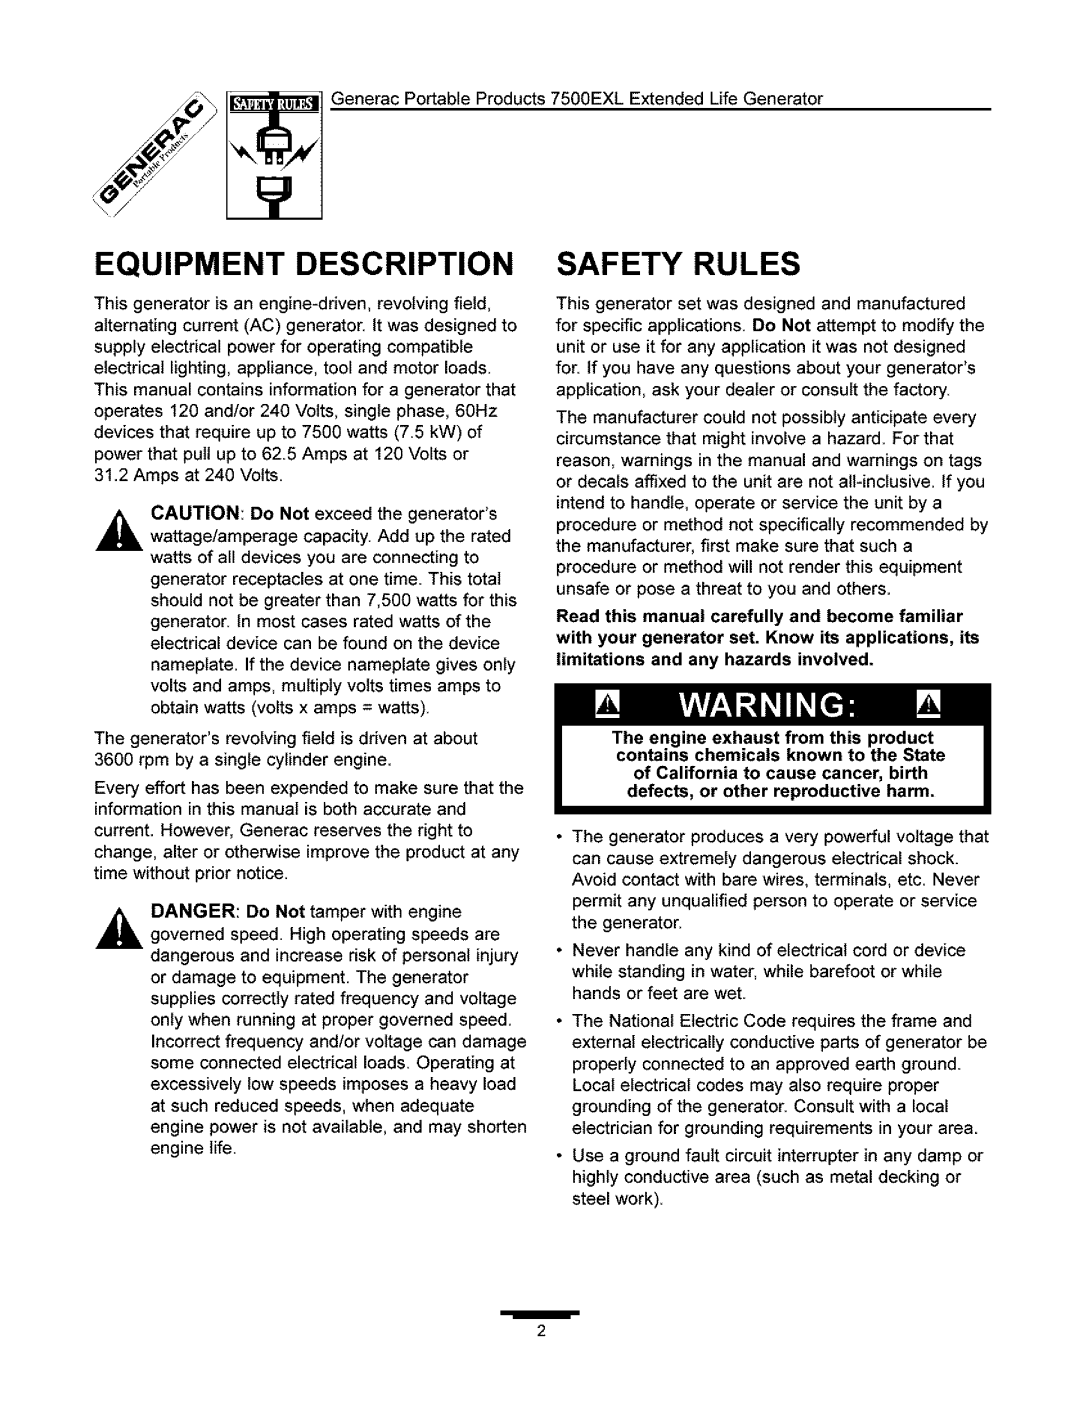 Generac 7500 owner manual Equipment Description, Safety Rules, engine life 